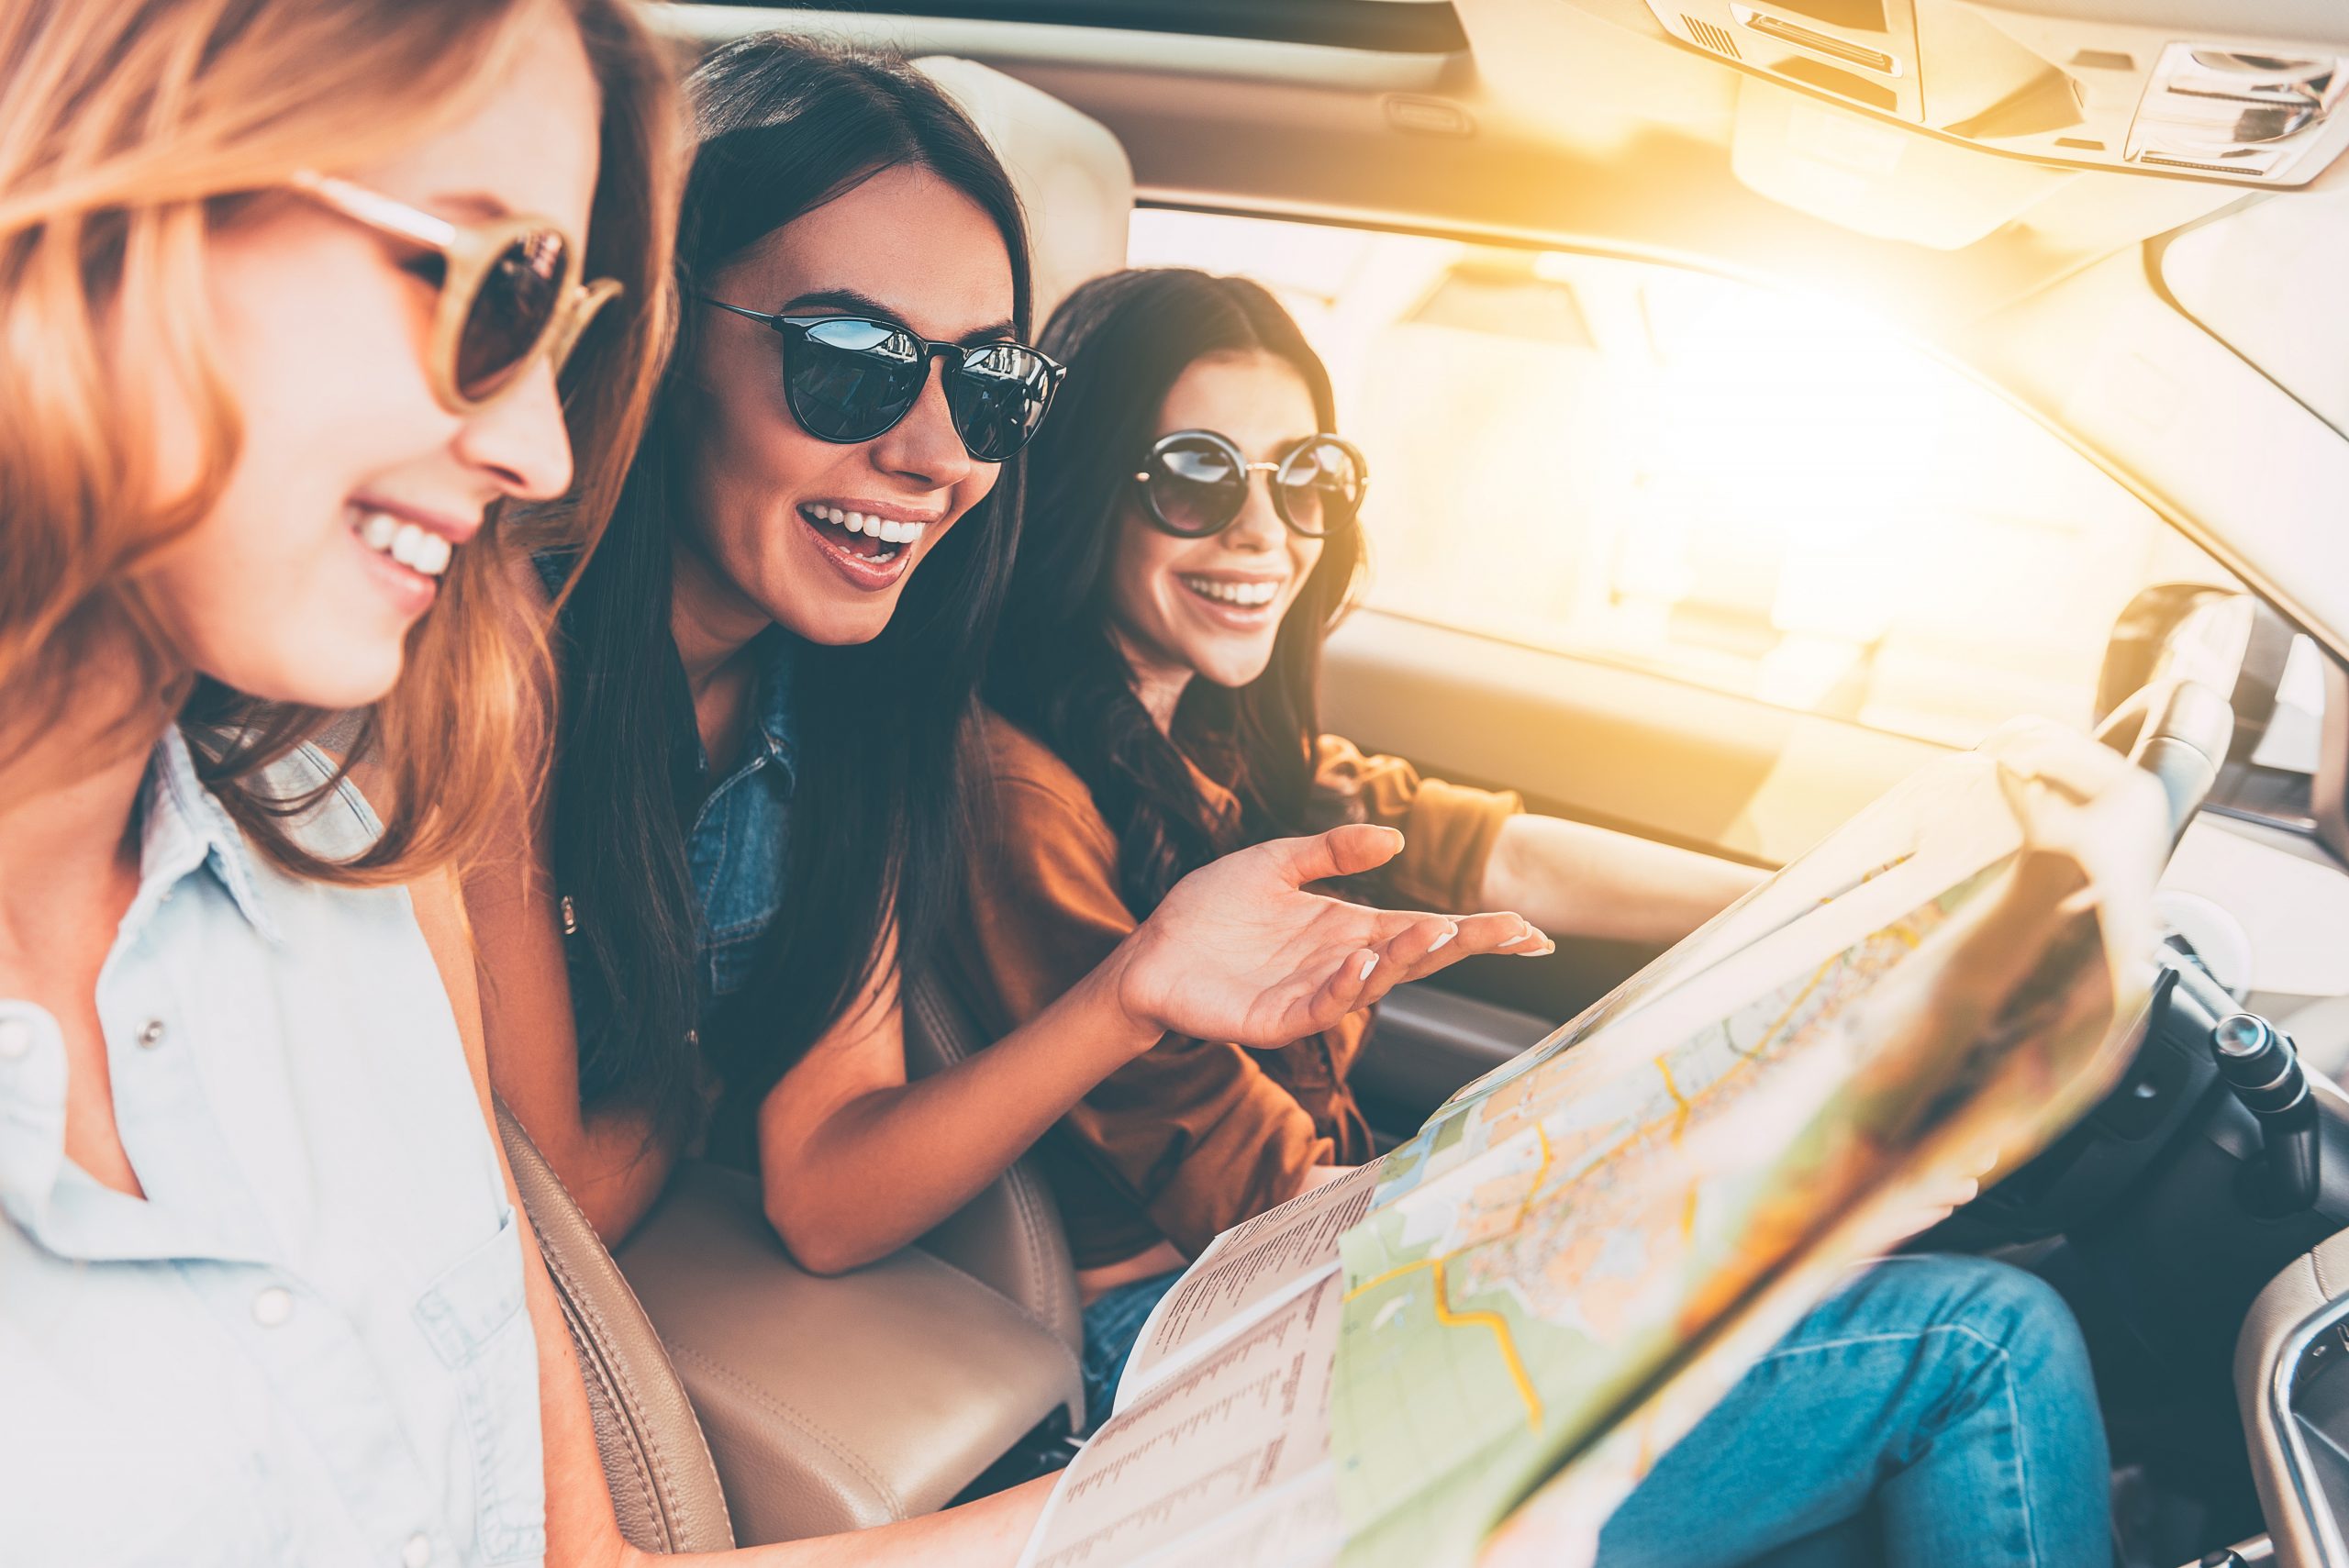 Adventure begins when you FlyILG and rent a car from Avis or Budget in the terminal. Always open when your flight lands. Drop box for after hours return or early flight departure